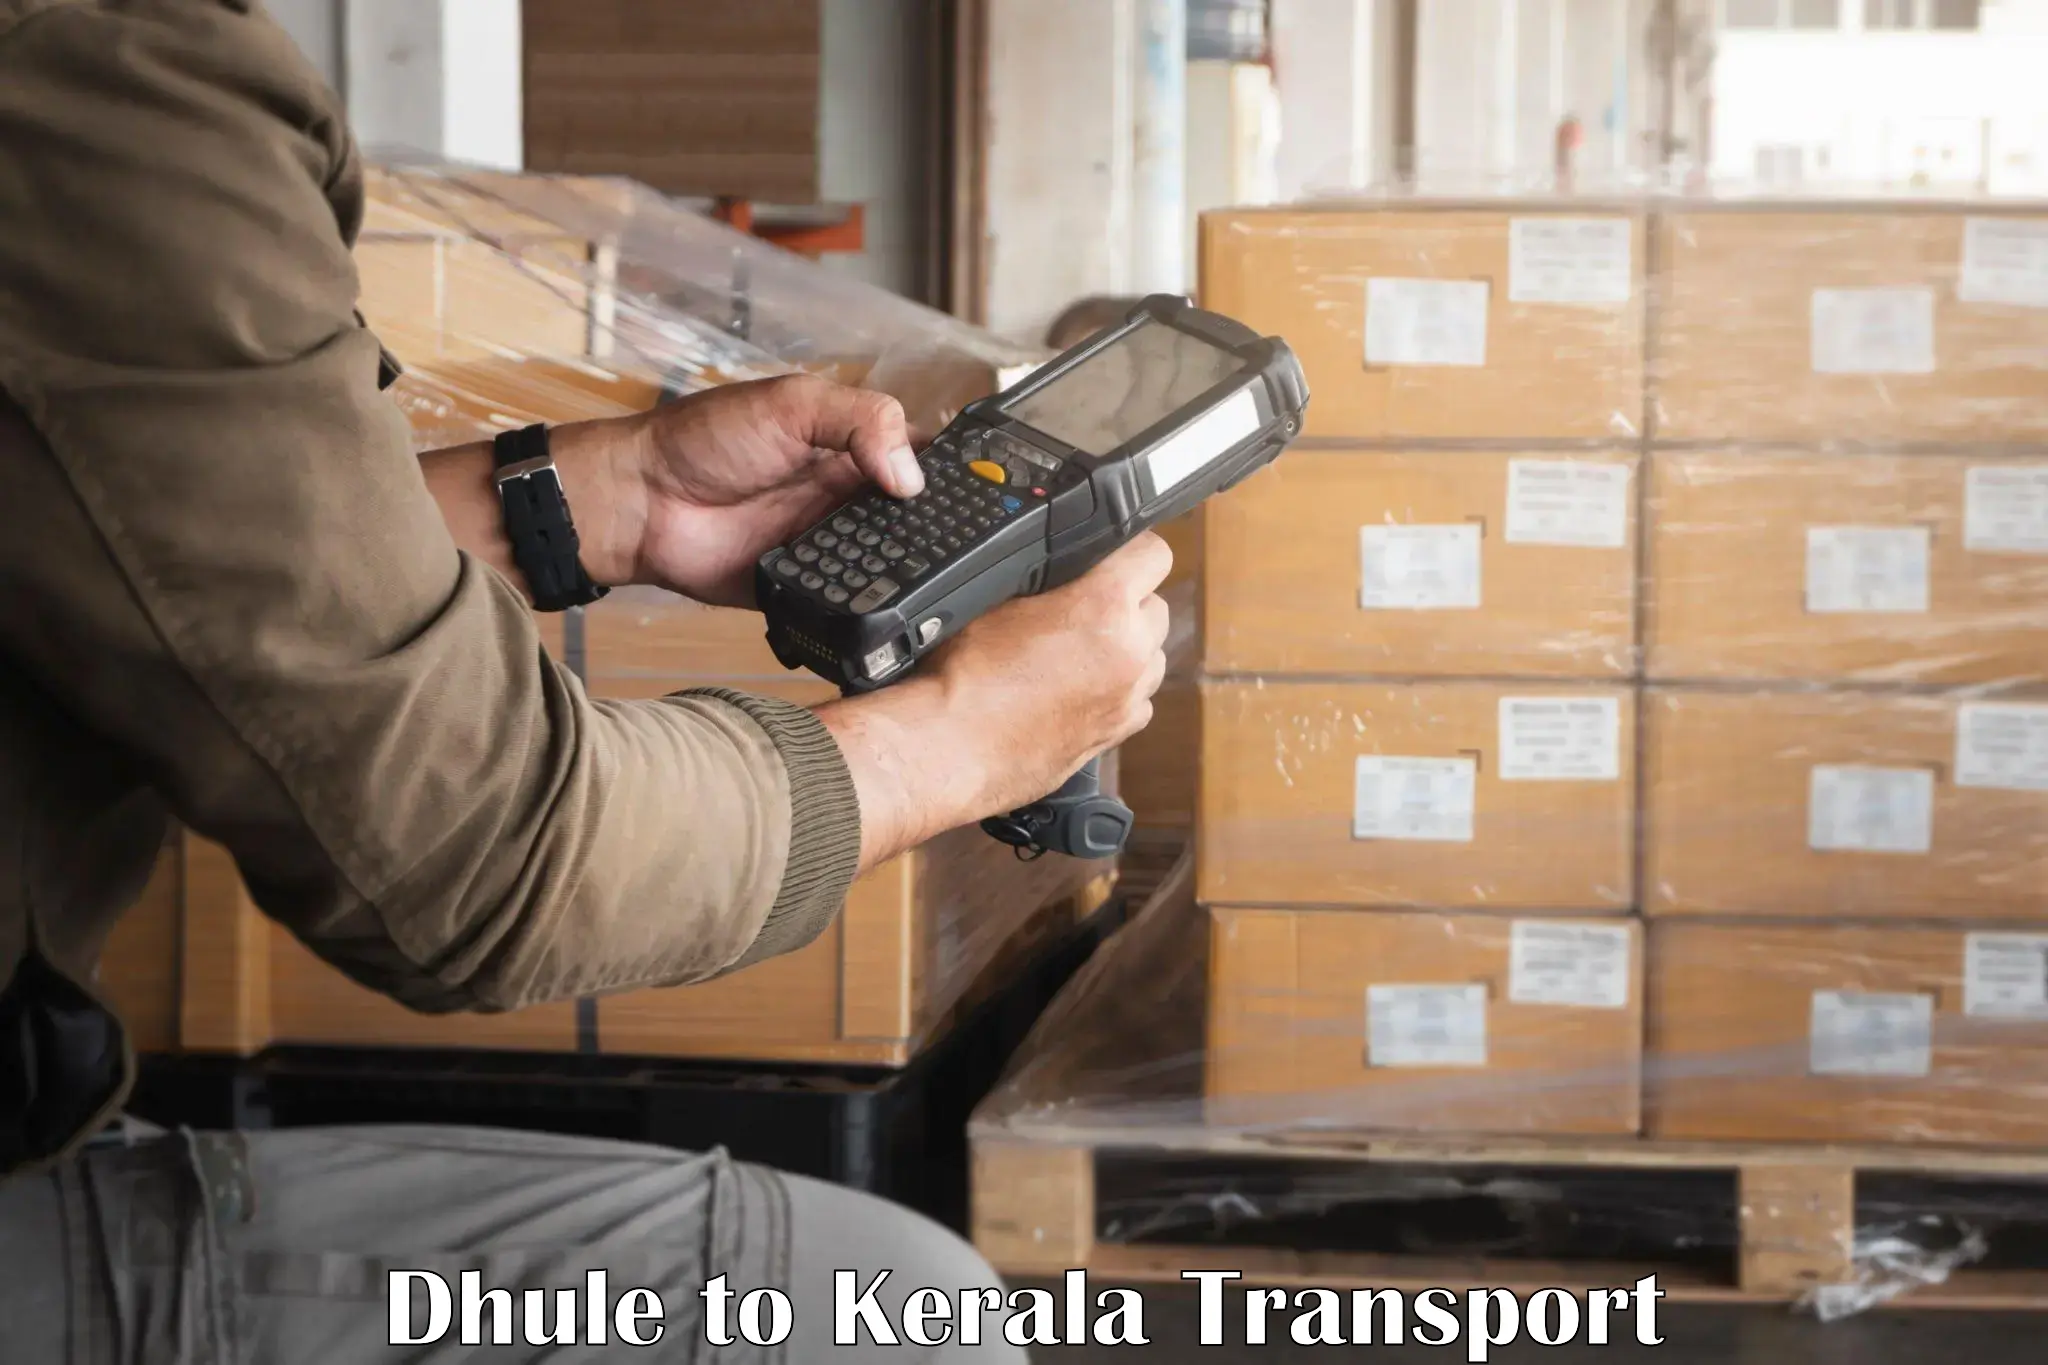 Land transport services Dhule to Wayanad